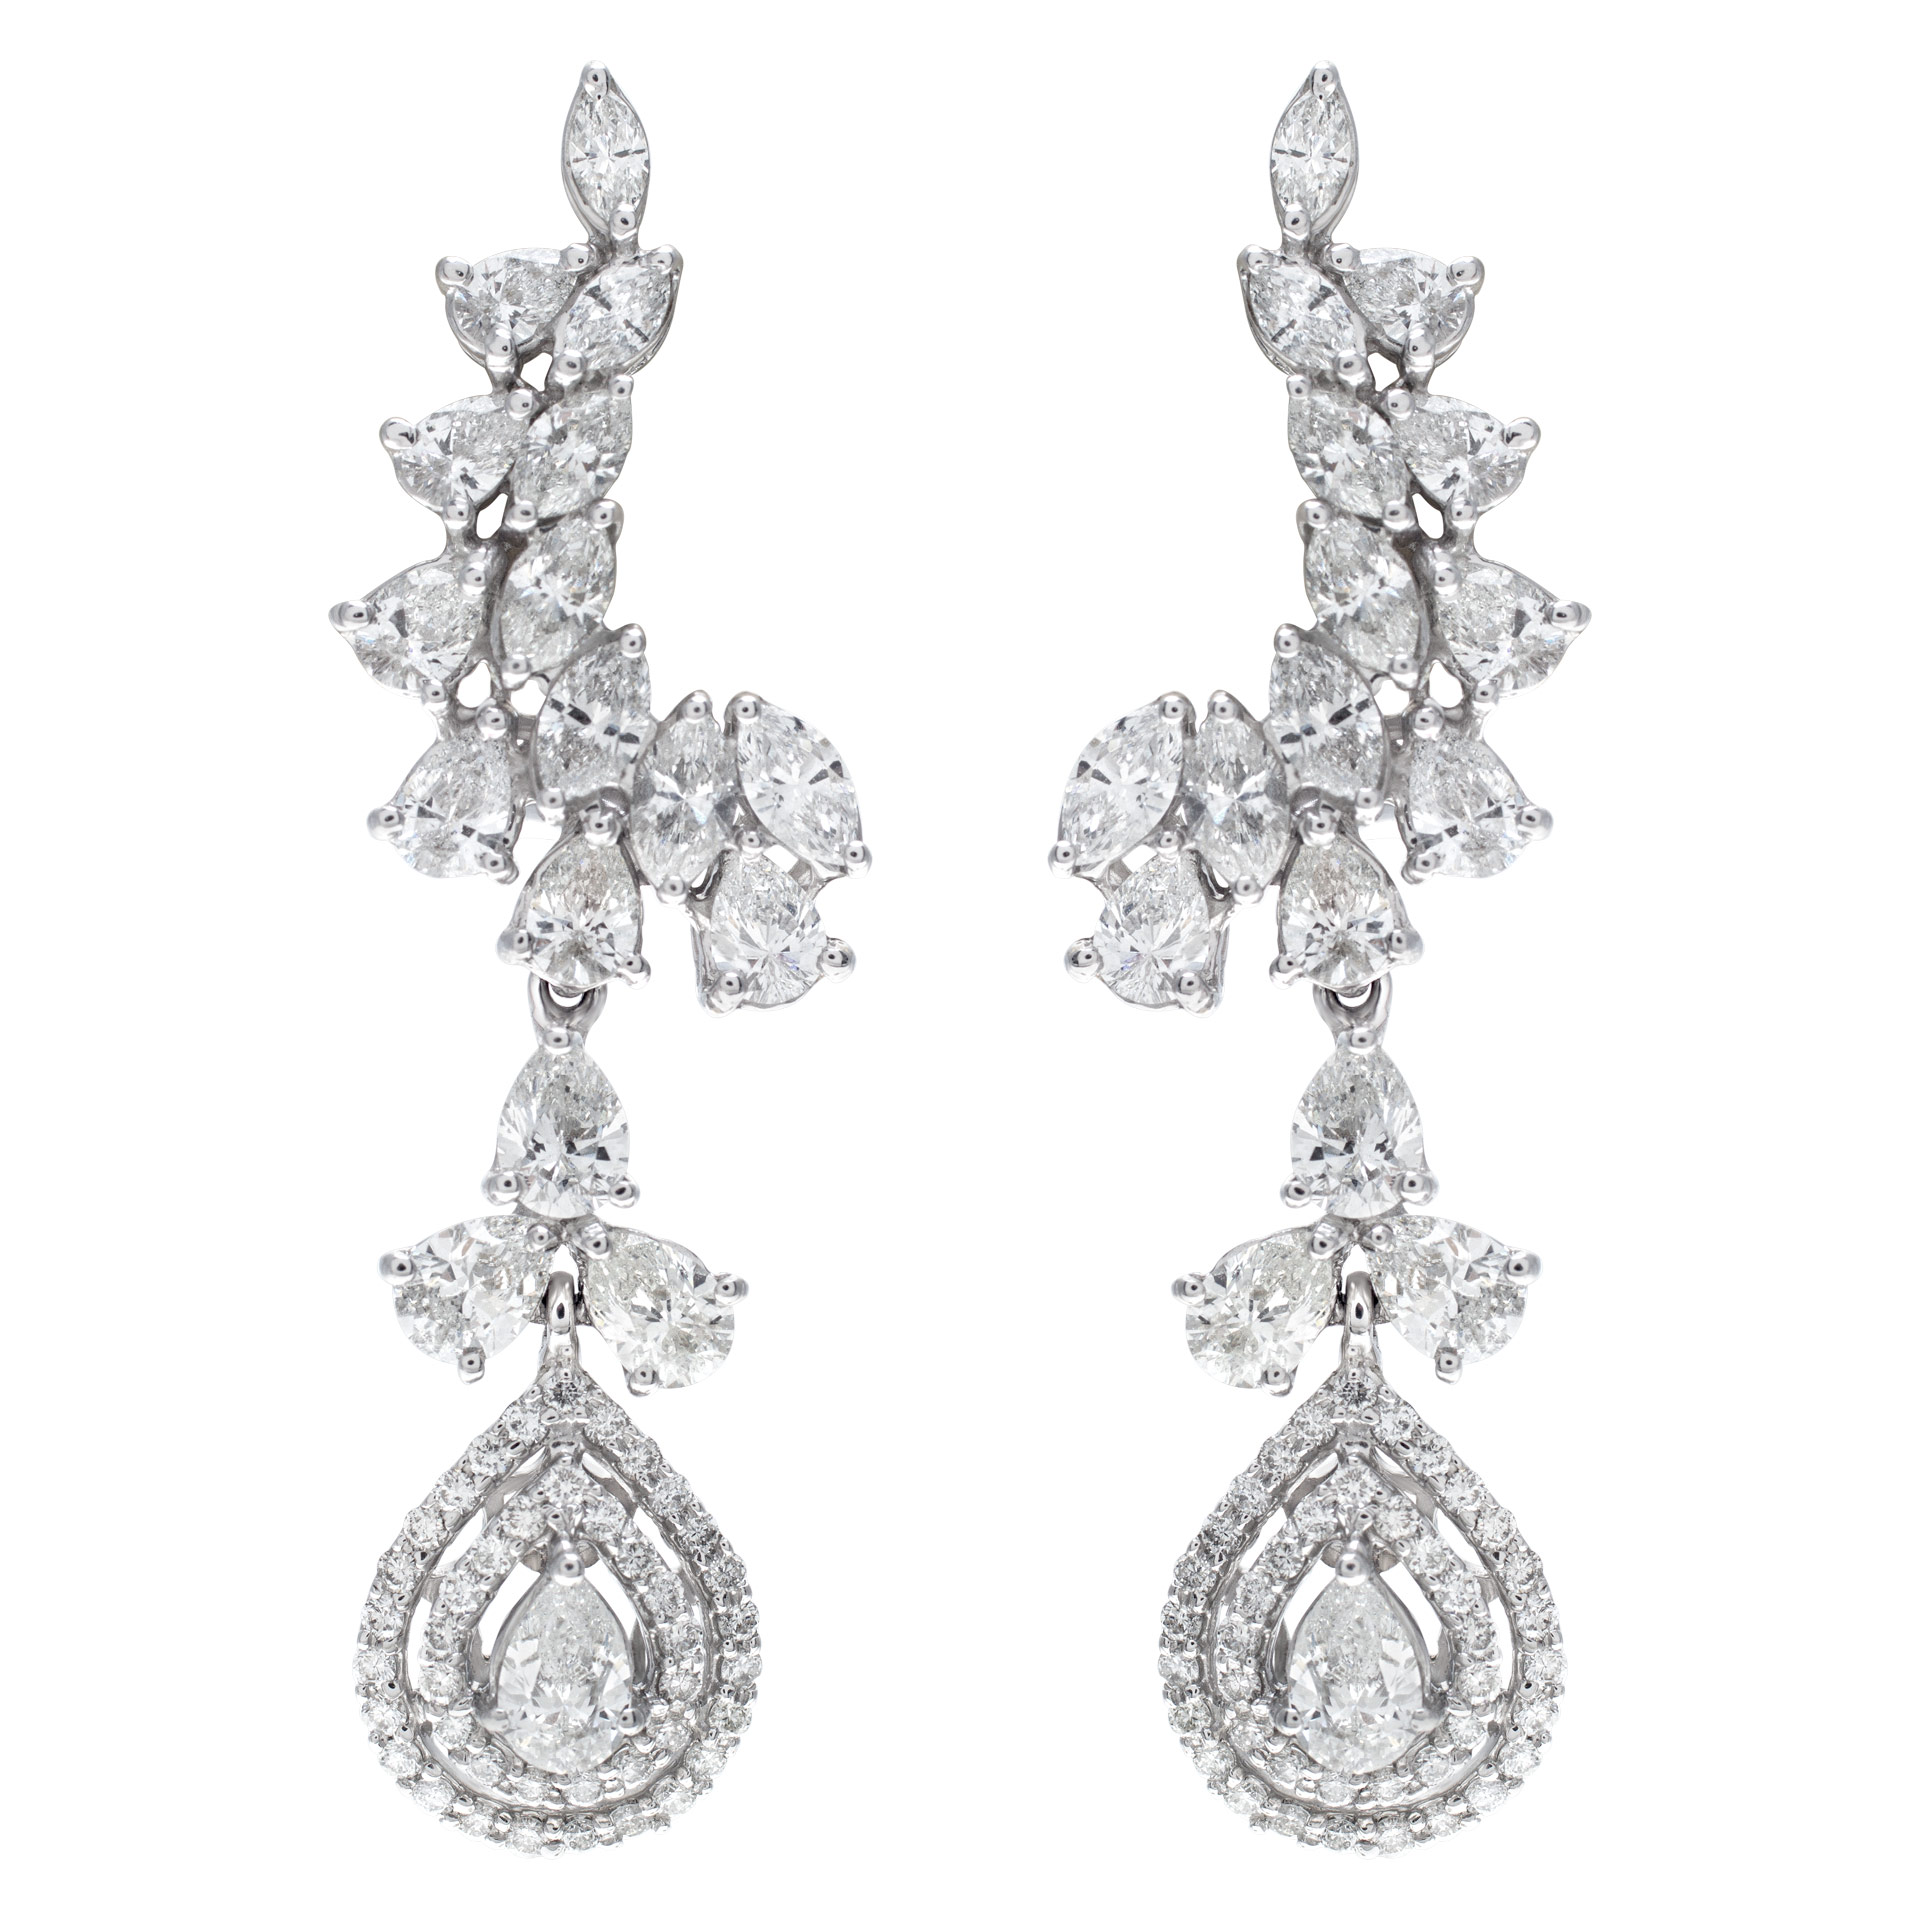 Brilliant marquise, pear, round cut diamond dangling earrings set in 18k white gold. Total diamonds approx. weight: 5.00 carats